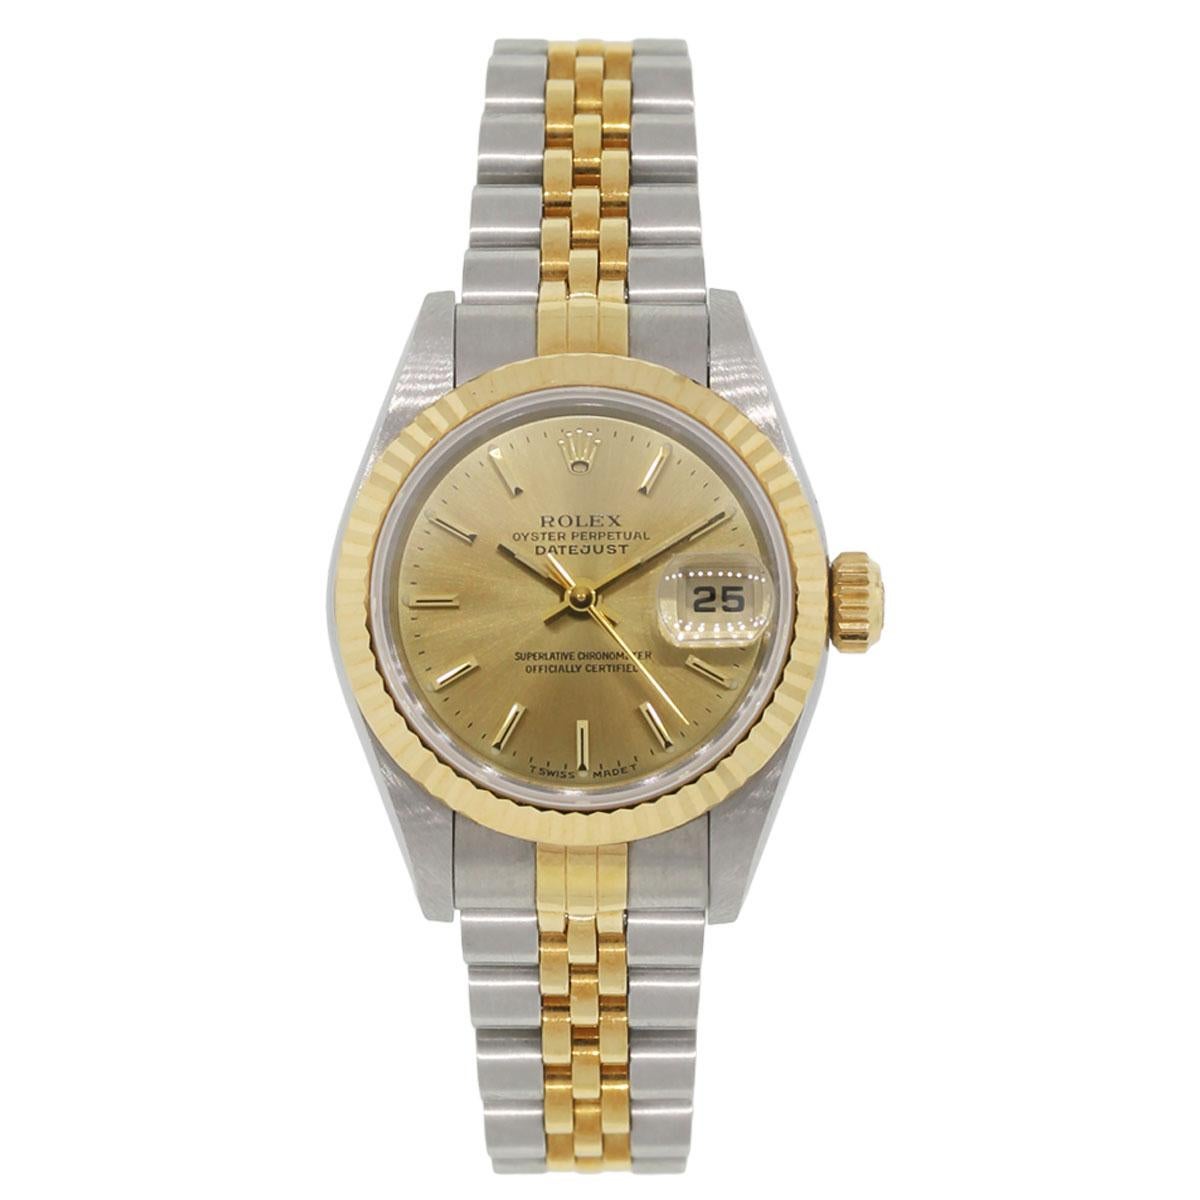 Brand: Rolex
MPN: 69173
Model: Datejust
Case Material:Stainless Steel
Case Diameter: 26mm
Crystal: Scratch resistant sapphire
Bezel: 18k Yellow Gold Fluted Bezel
Dial: Champagne stick dial with date window at the 3 o’clock position.
Bracelet: Two